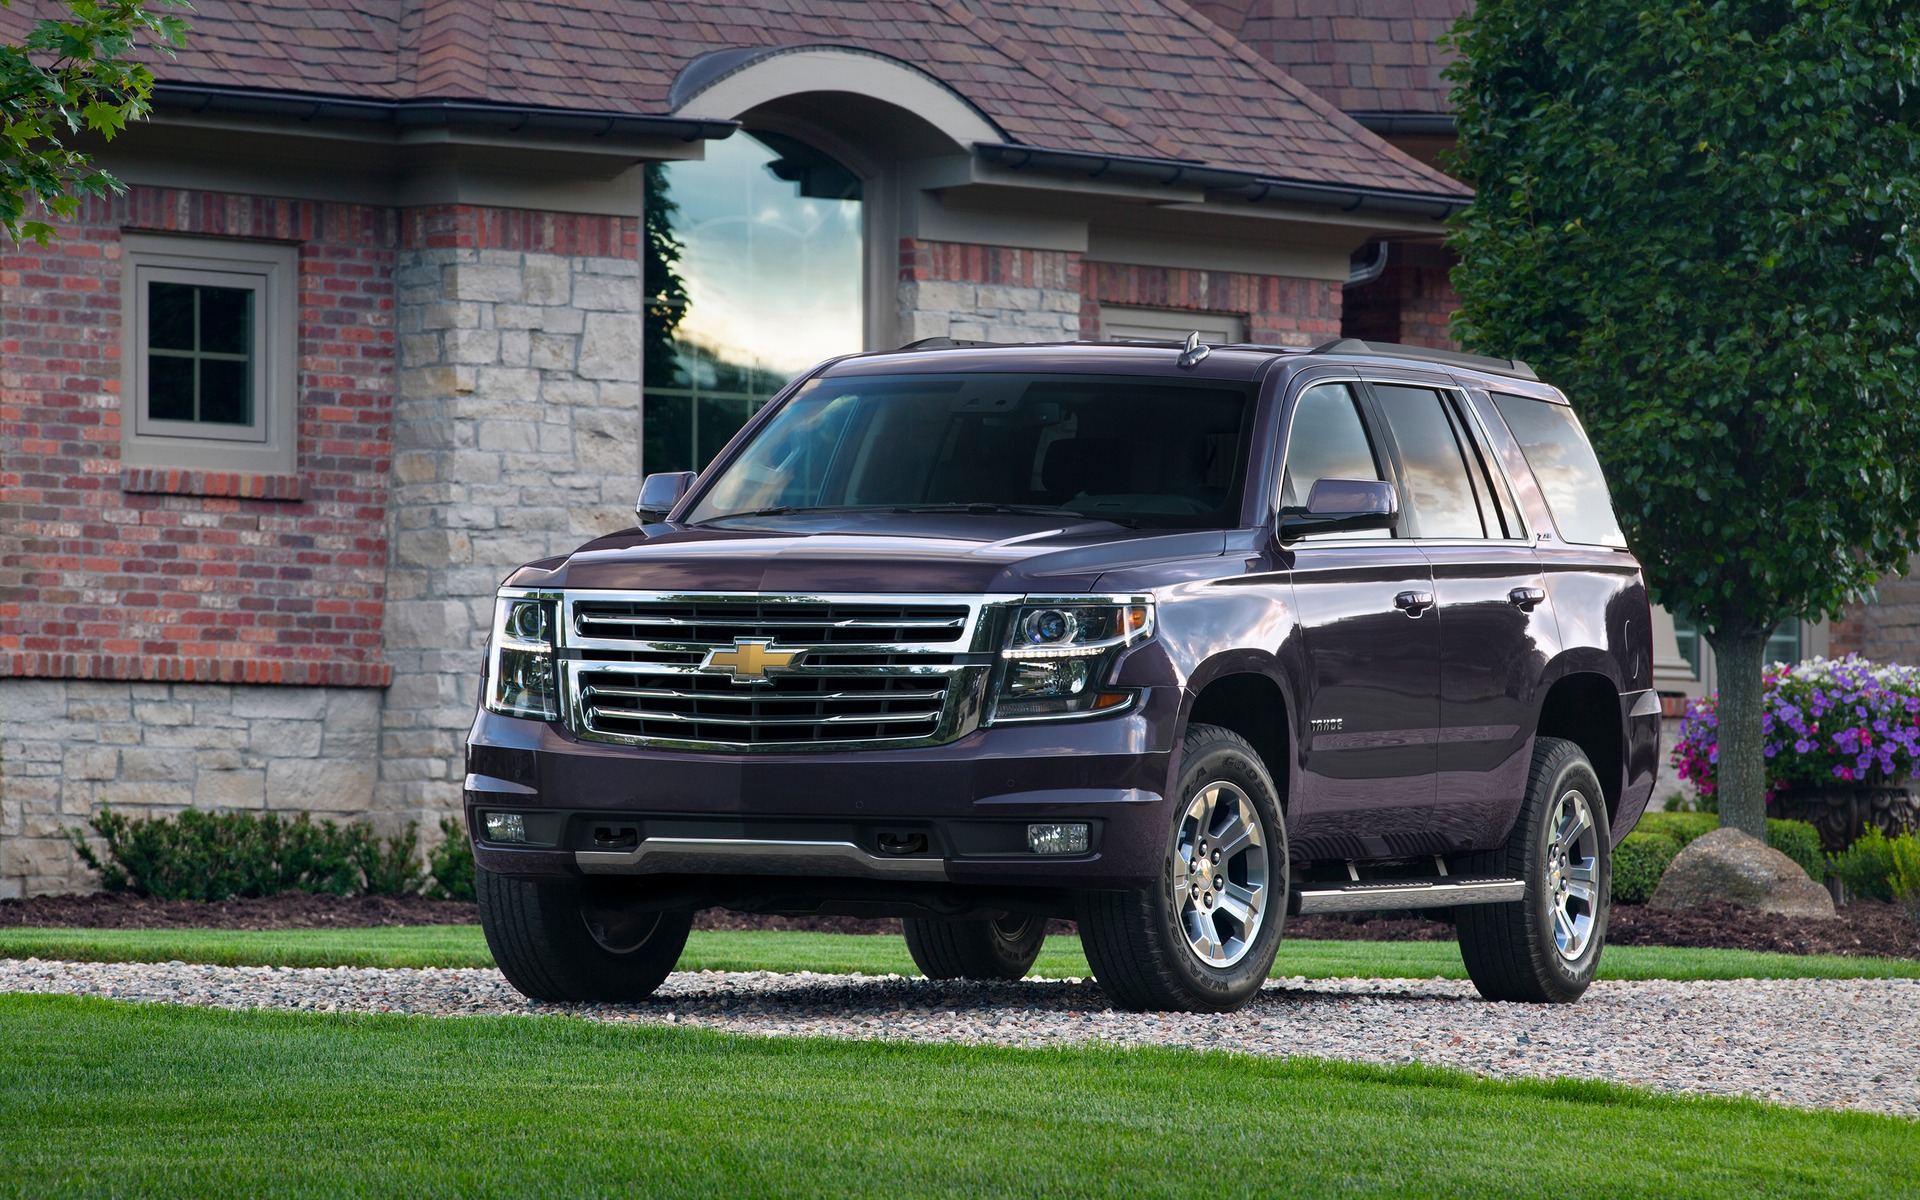 2017 Chevrolet Tahoe photos 1/3 The Car Guide